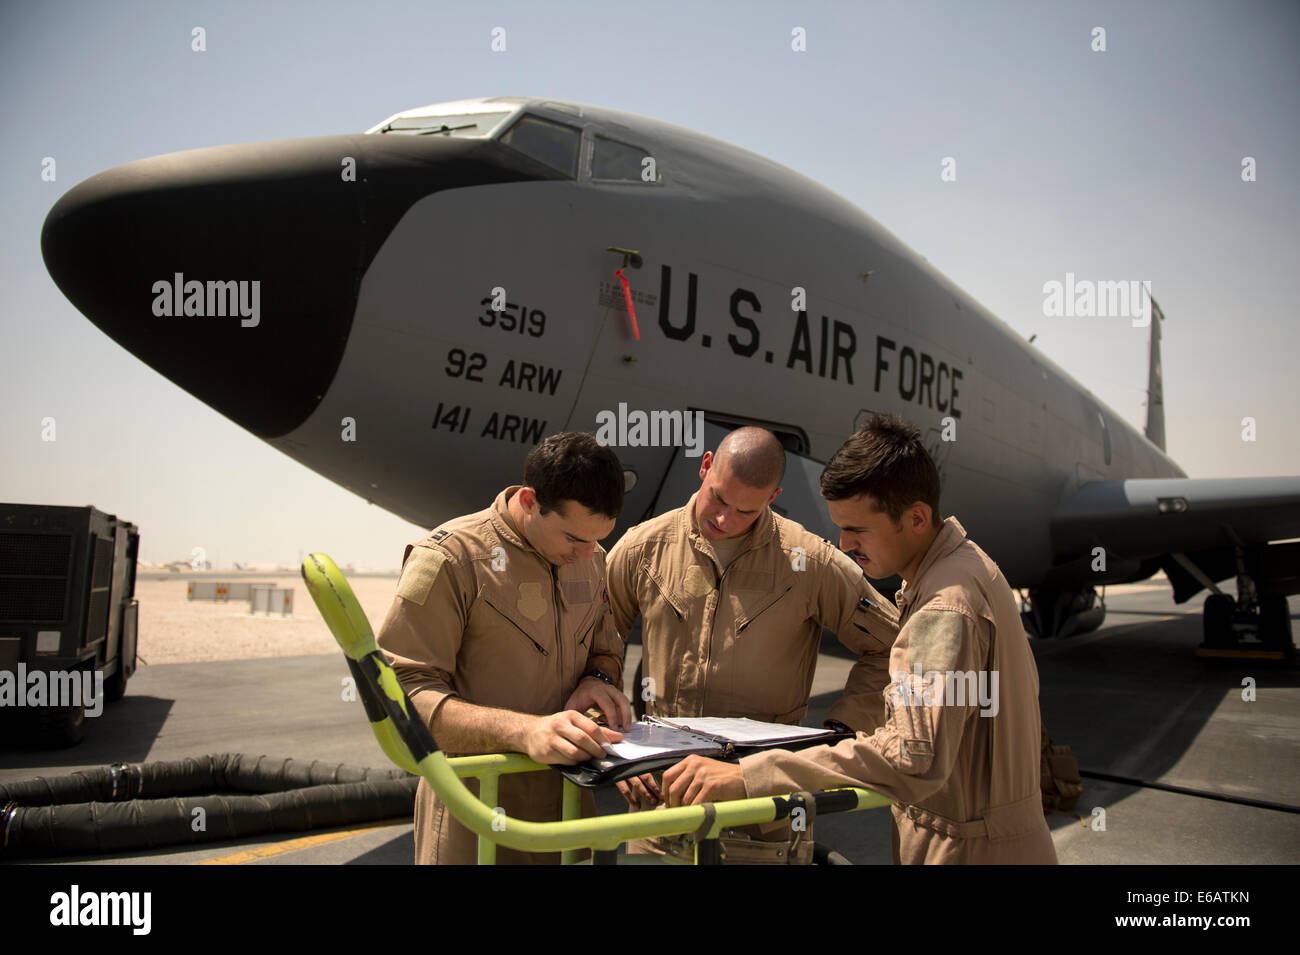 U.S. Air Force Capt. Christopher Carr, 1st Lt. Daniel Winningham and Airman 1st Class Jordan Gese, KC-135 Stratotanker aircrew members with the 340th Expeditionary Air Refueling Squadron, review a preflight inspection at an undisclosed location July 22, 2 Stock Photo